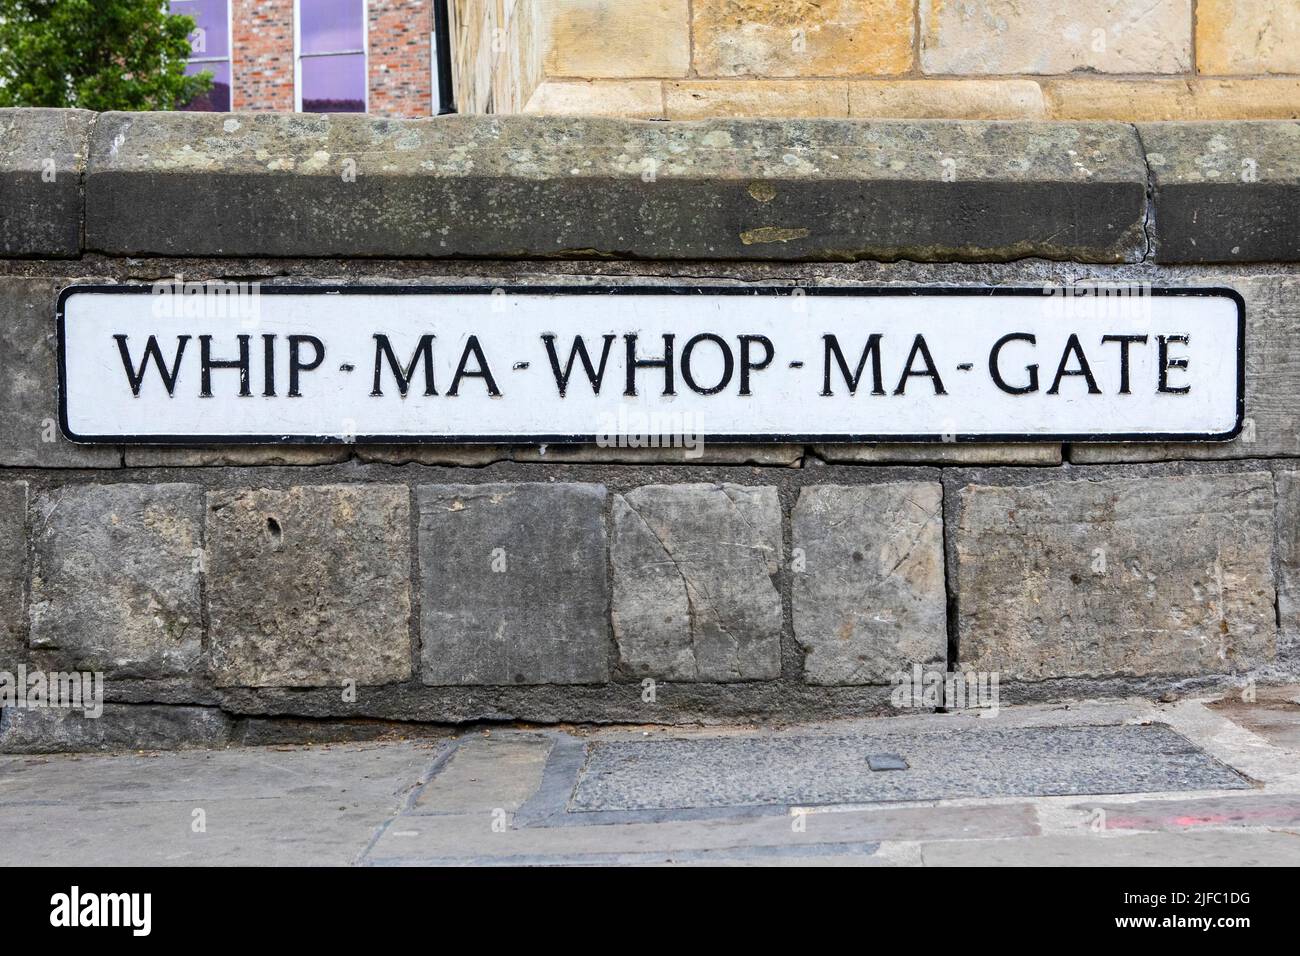 Street sign for Whip-Ma-Whop-Ma-Gate in the city of York, UK. Stock Photo